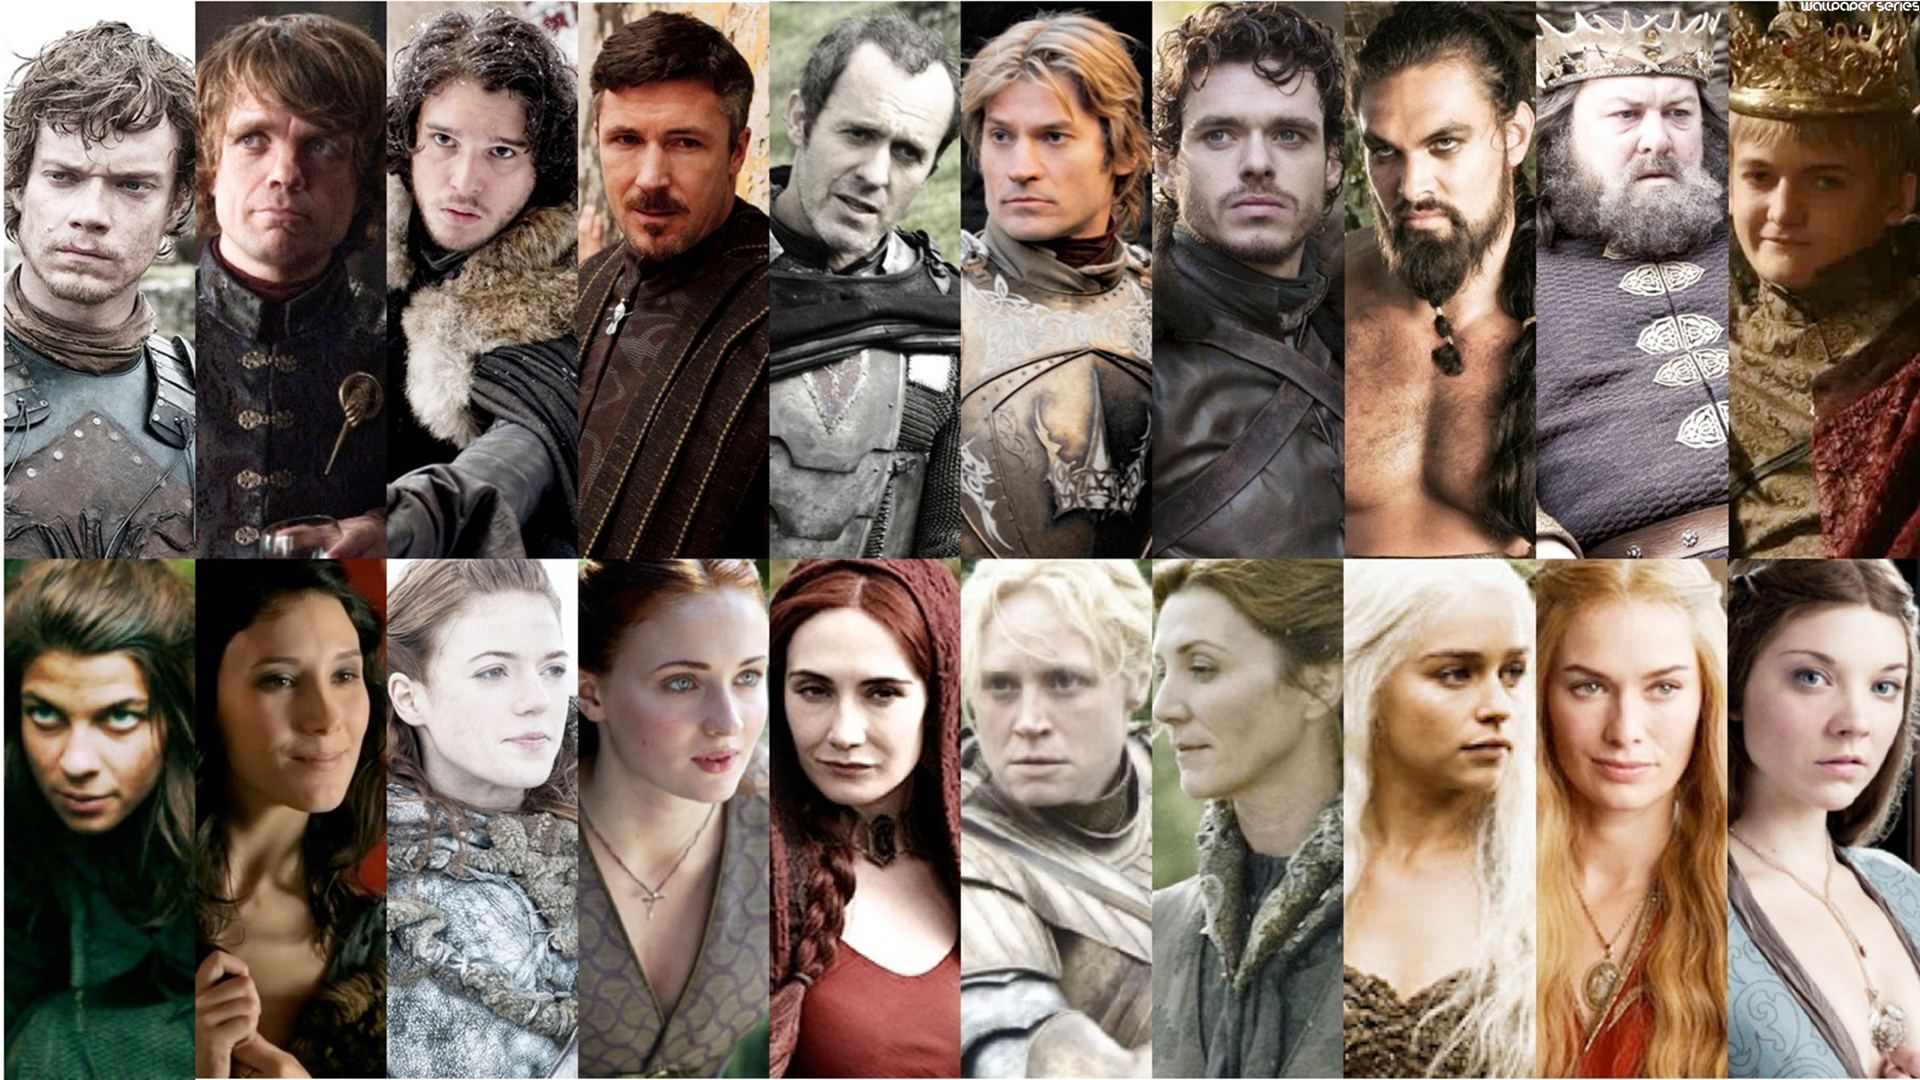 Game of Thrones Characters Wallpaper Free Game of Thrones Characters Background